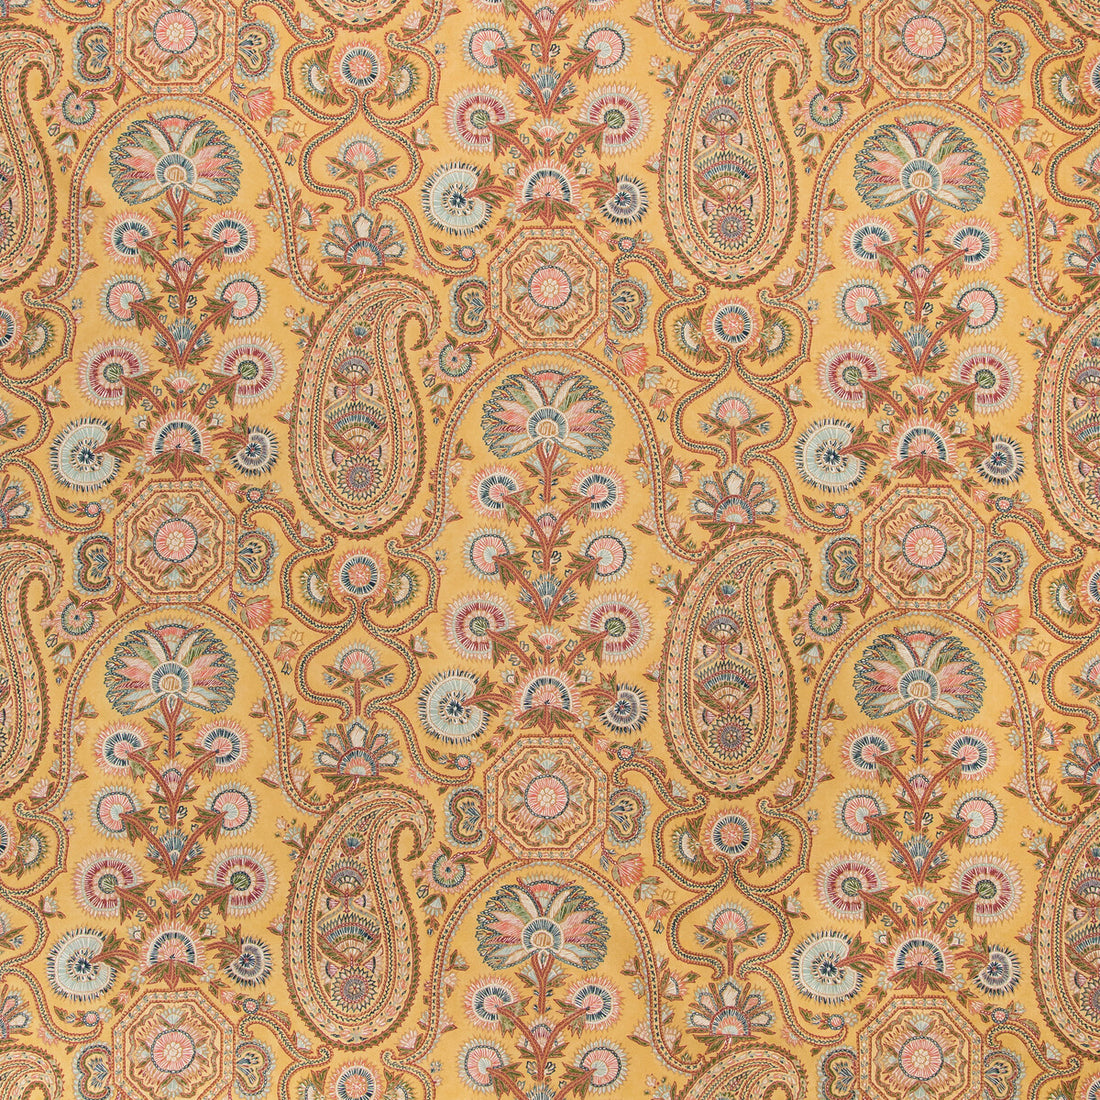 Saraya Print fabric in saffron color - pattern 8020100.4593.0 - by Brunschwig &amp; Fils in the Grand Bazaar collection